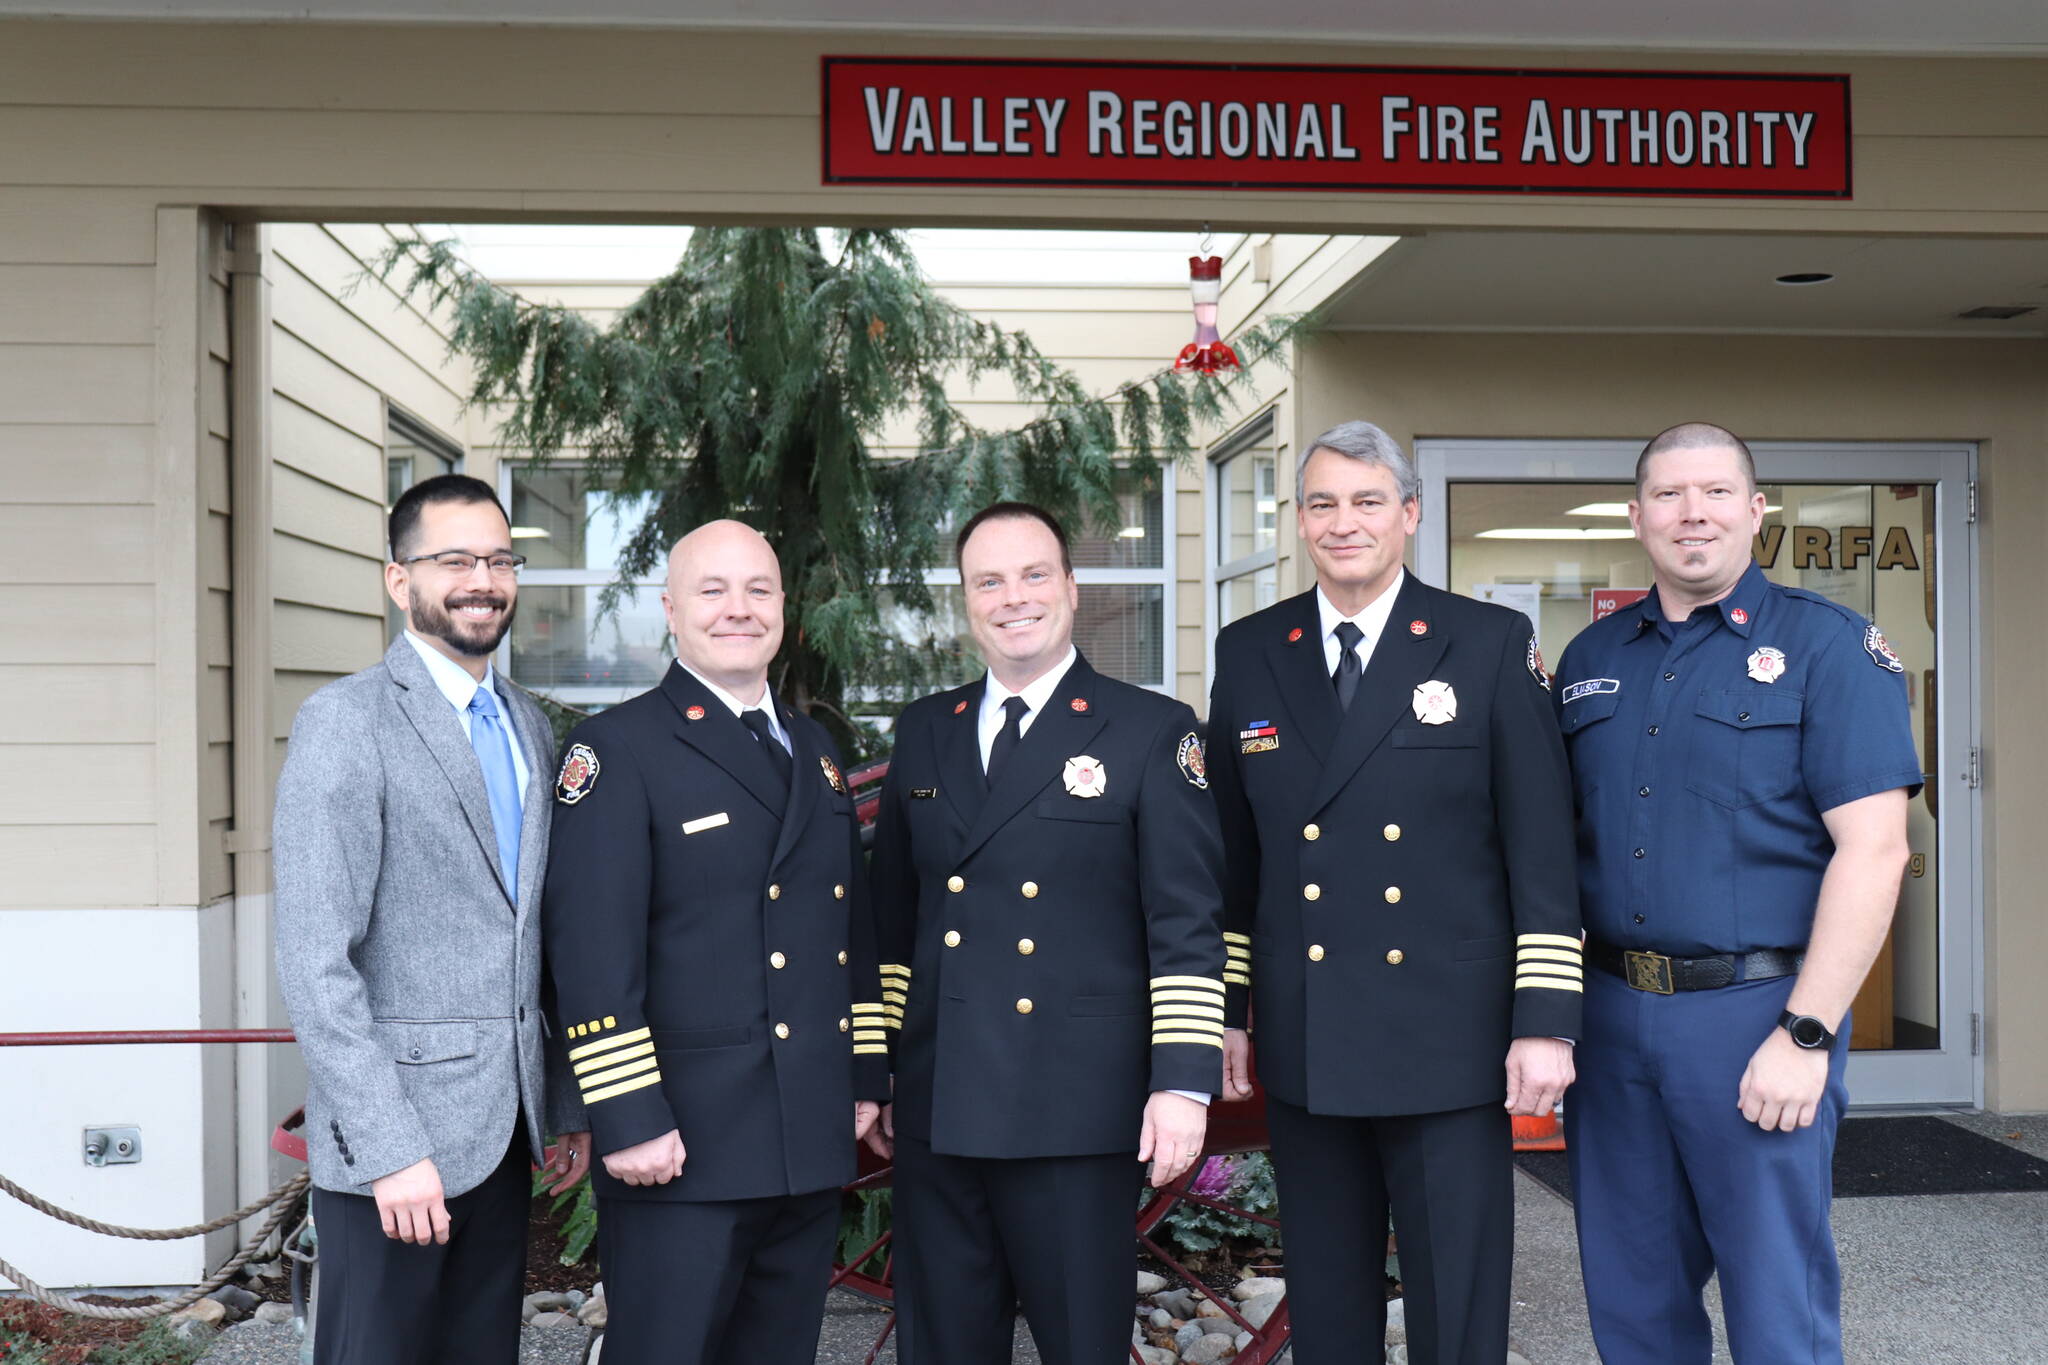 Photo courtesy of Valley Regional Fire Authority
(Left to right) Data analyst Noah Chang, Deputy Chief Rick Olson, Fire Chief Brad Thompson, Deputy Chief Dave Larberg and Captain Tyler Eliason pose for a photo after receiving accreditation on Wednesday, Dec. 15, 2021.